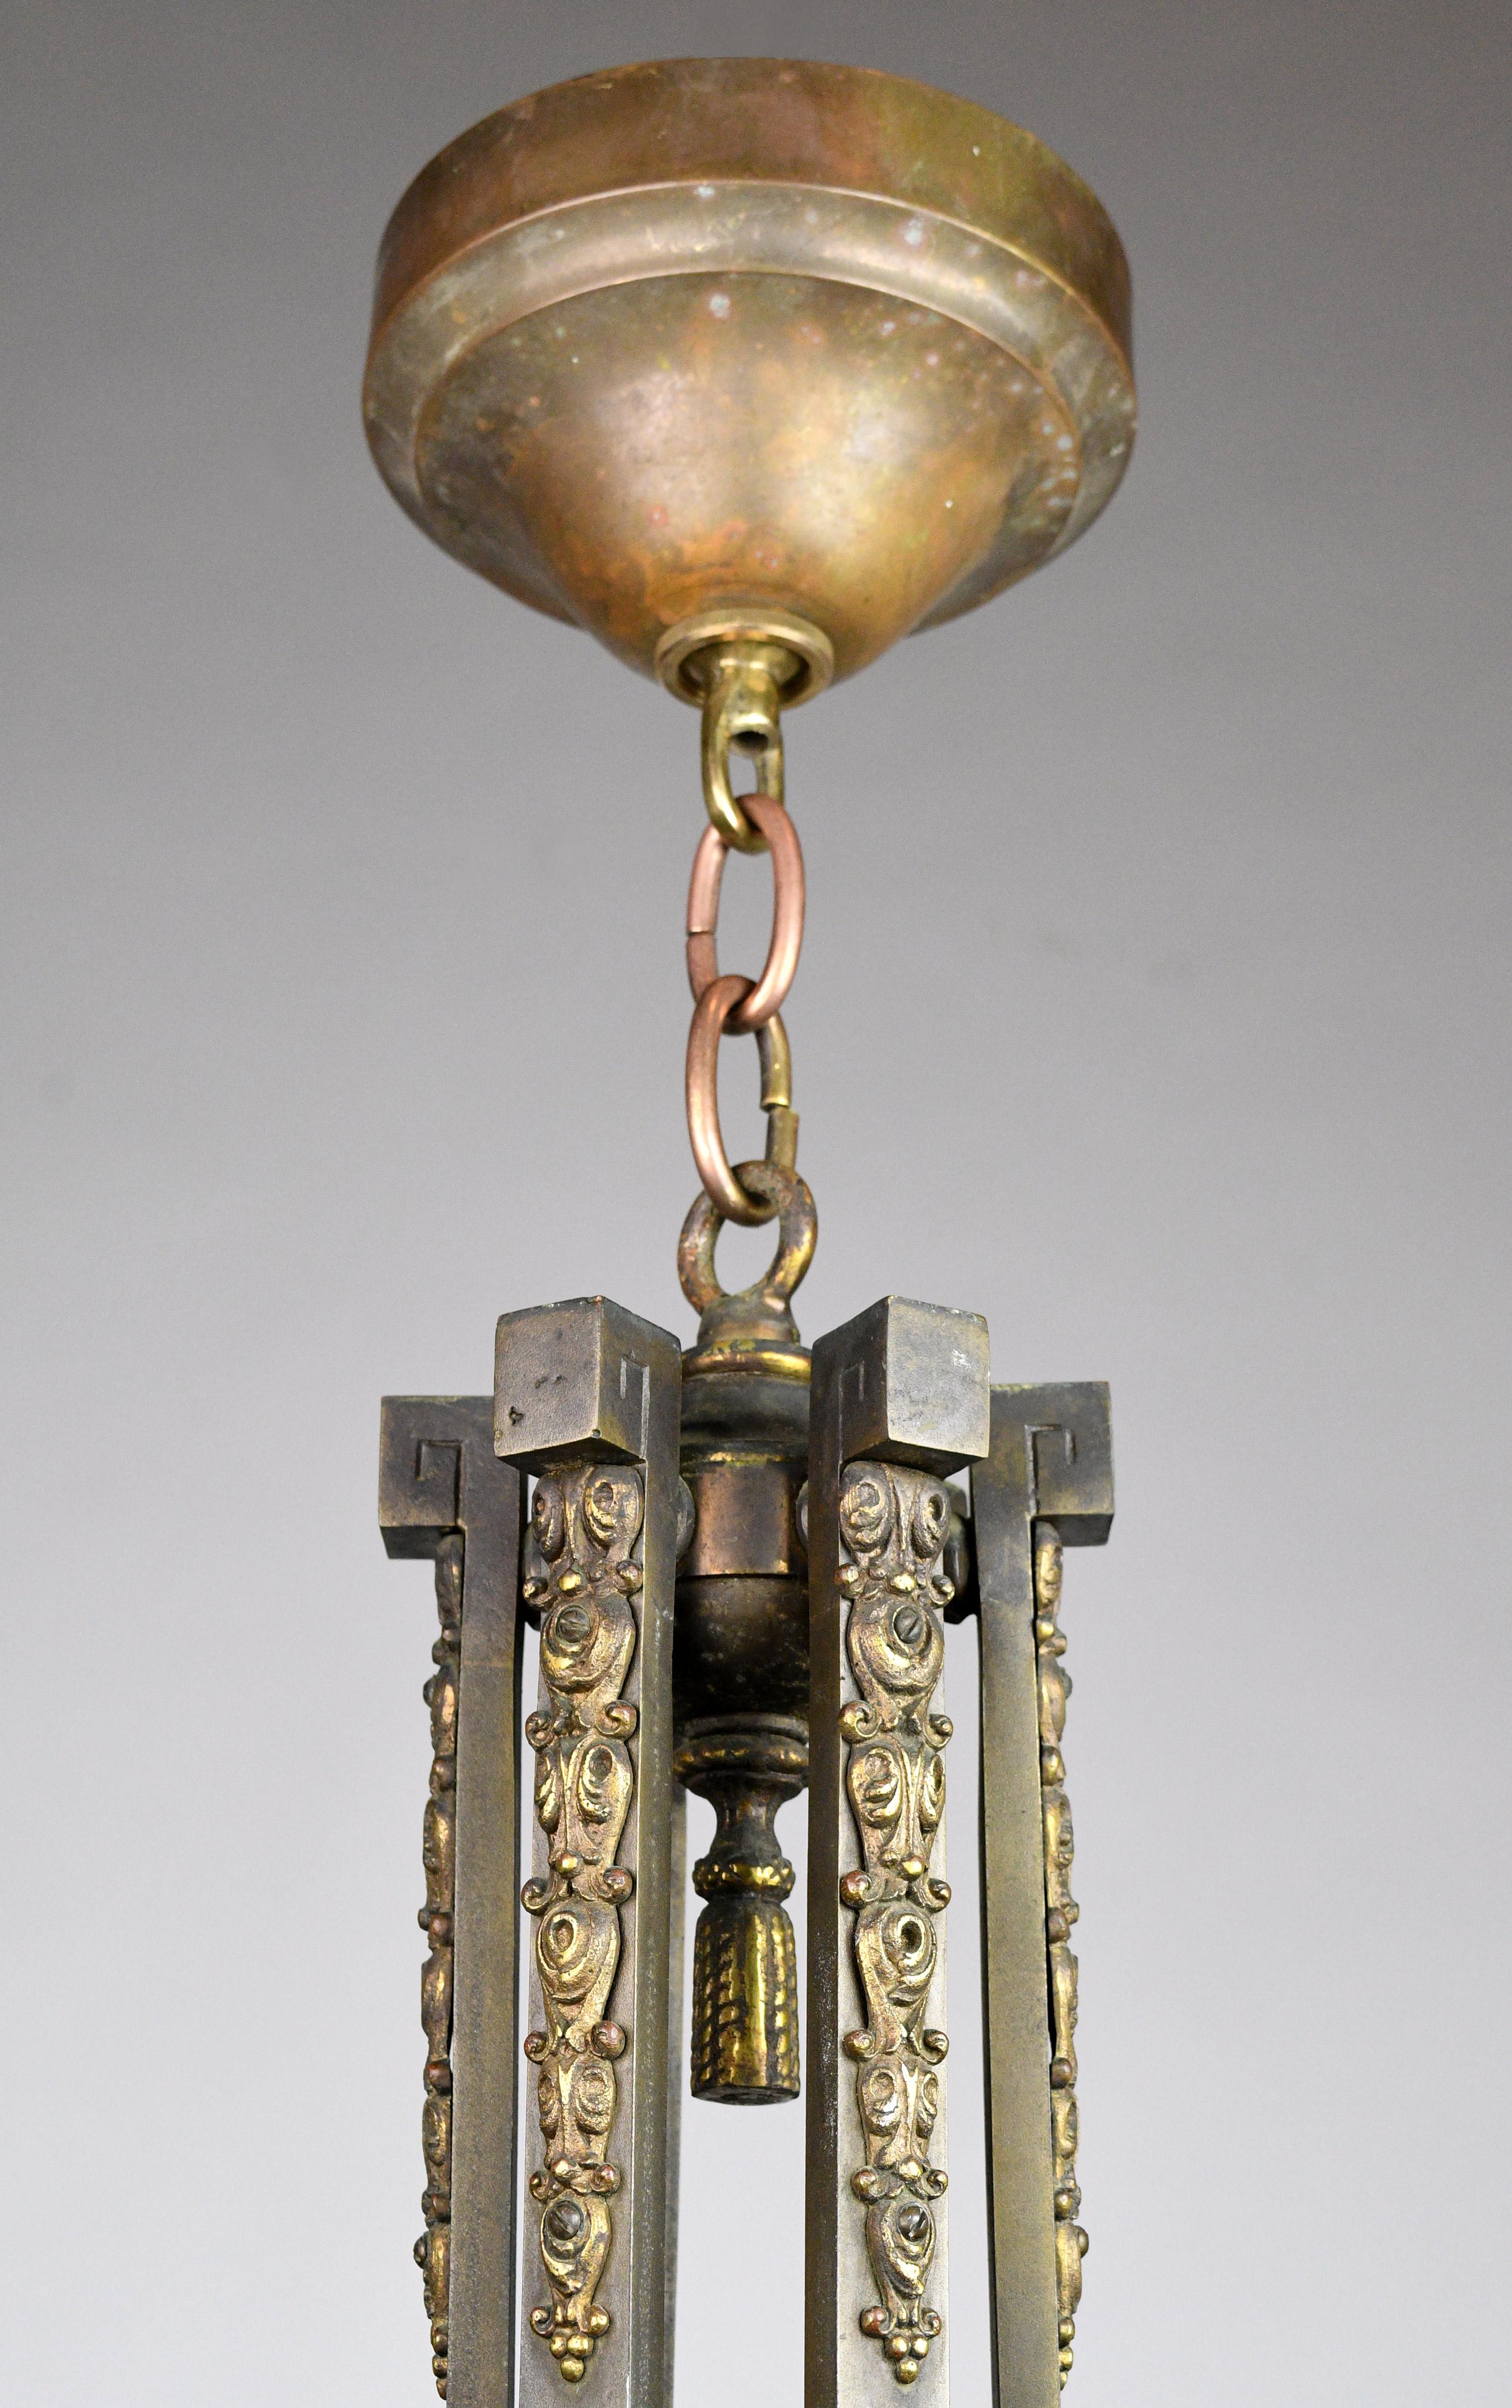 Elegant bronze chandelier with gracefully curving lines and swirling details throughout. Six “arms” swoop downward at an extreme angle, lending a dynamic quality to the fixture. At the bottom, a pronounced finial adds to the robust quality.

circa